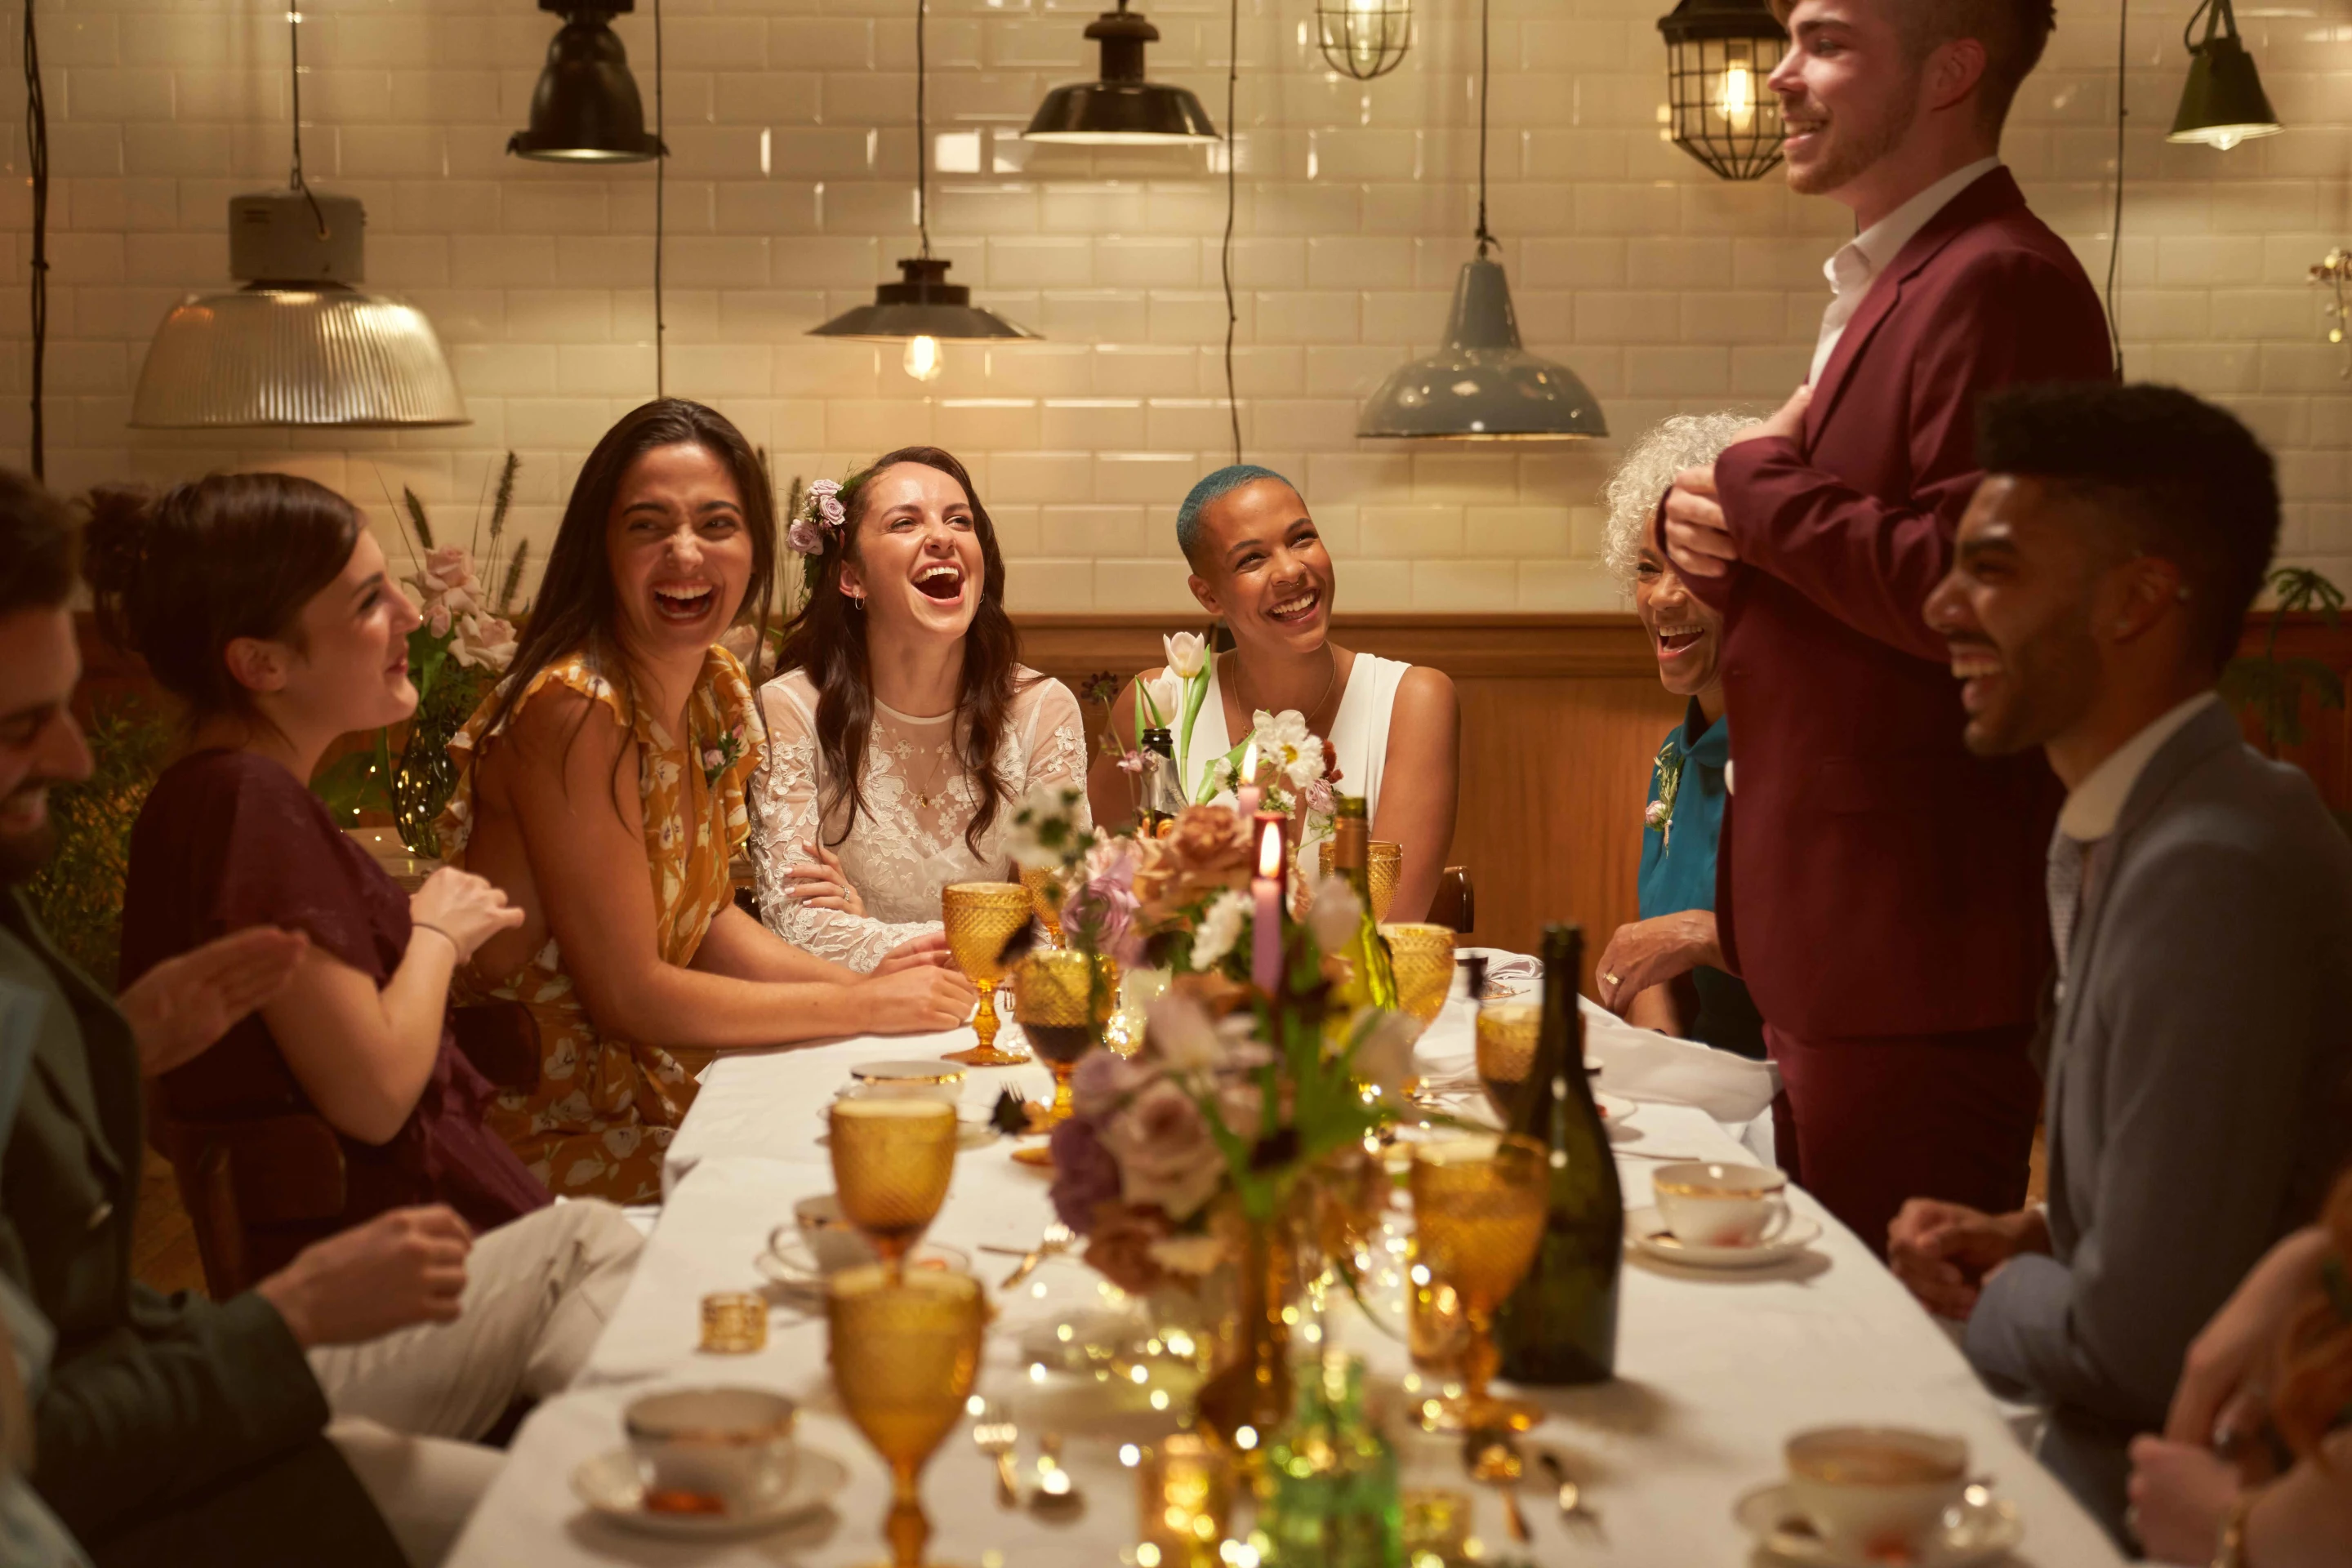 A couple celebrates at their wedding dinner party surrounded by guests